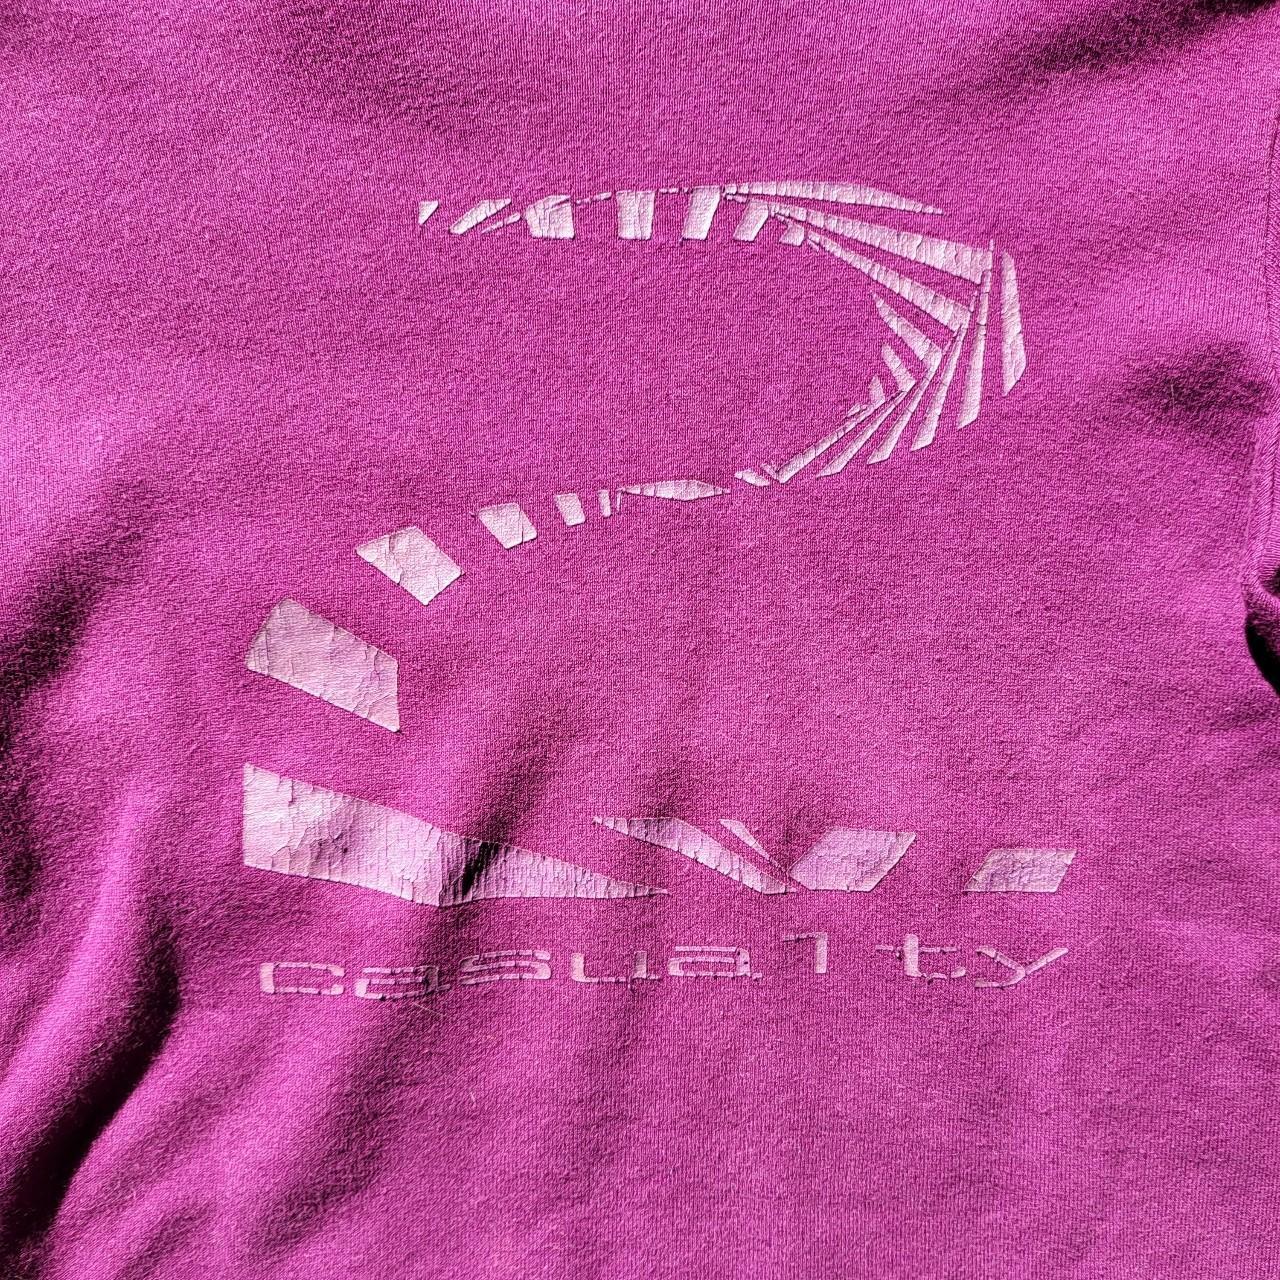 Product Image 2 - purple beauty:beast pullover sweater

fading to